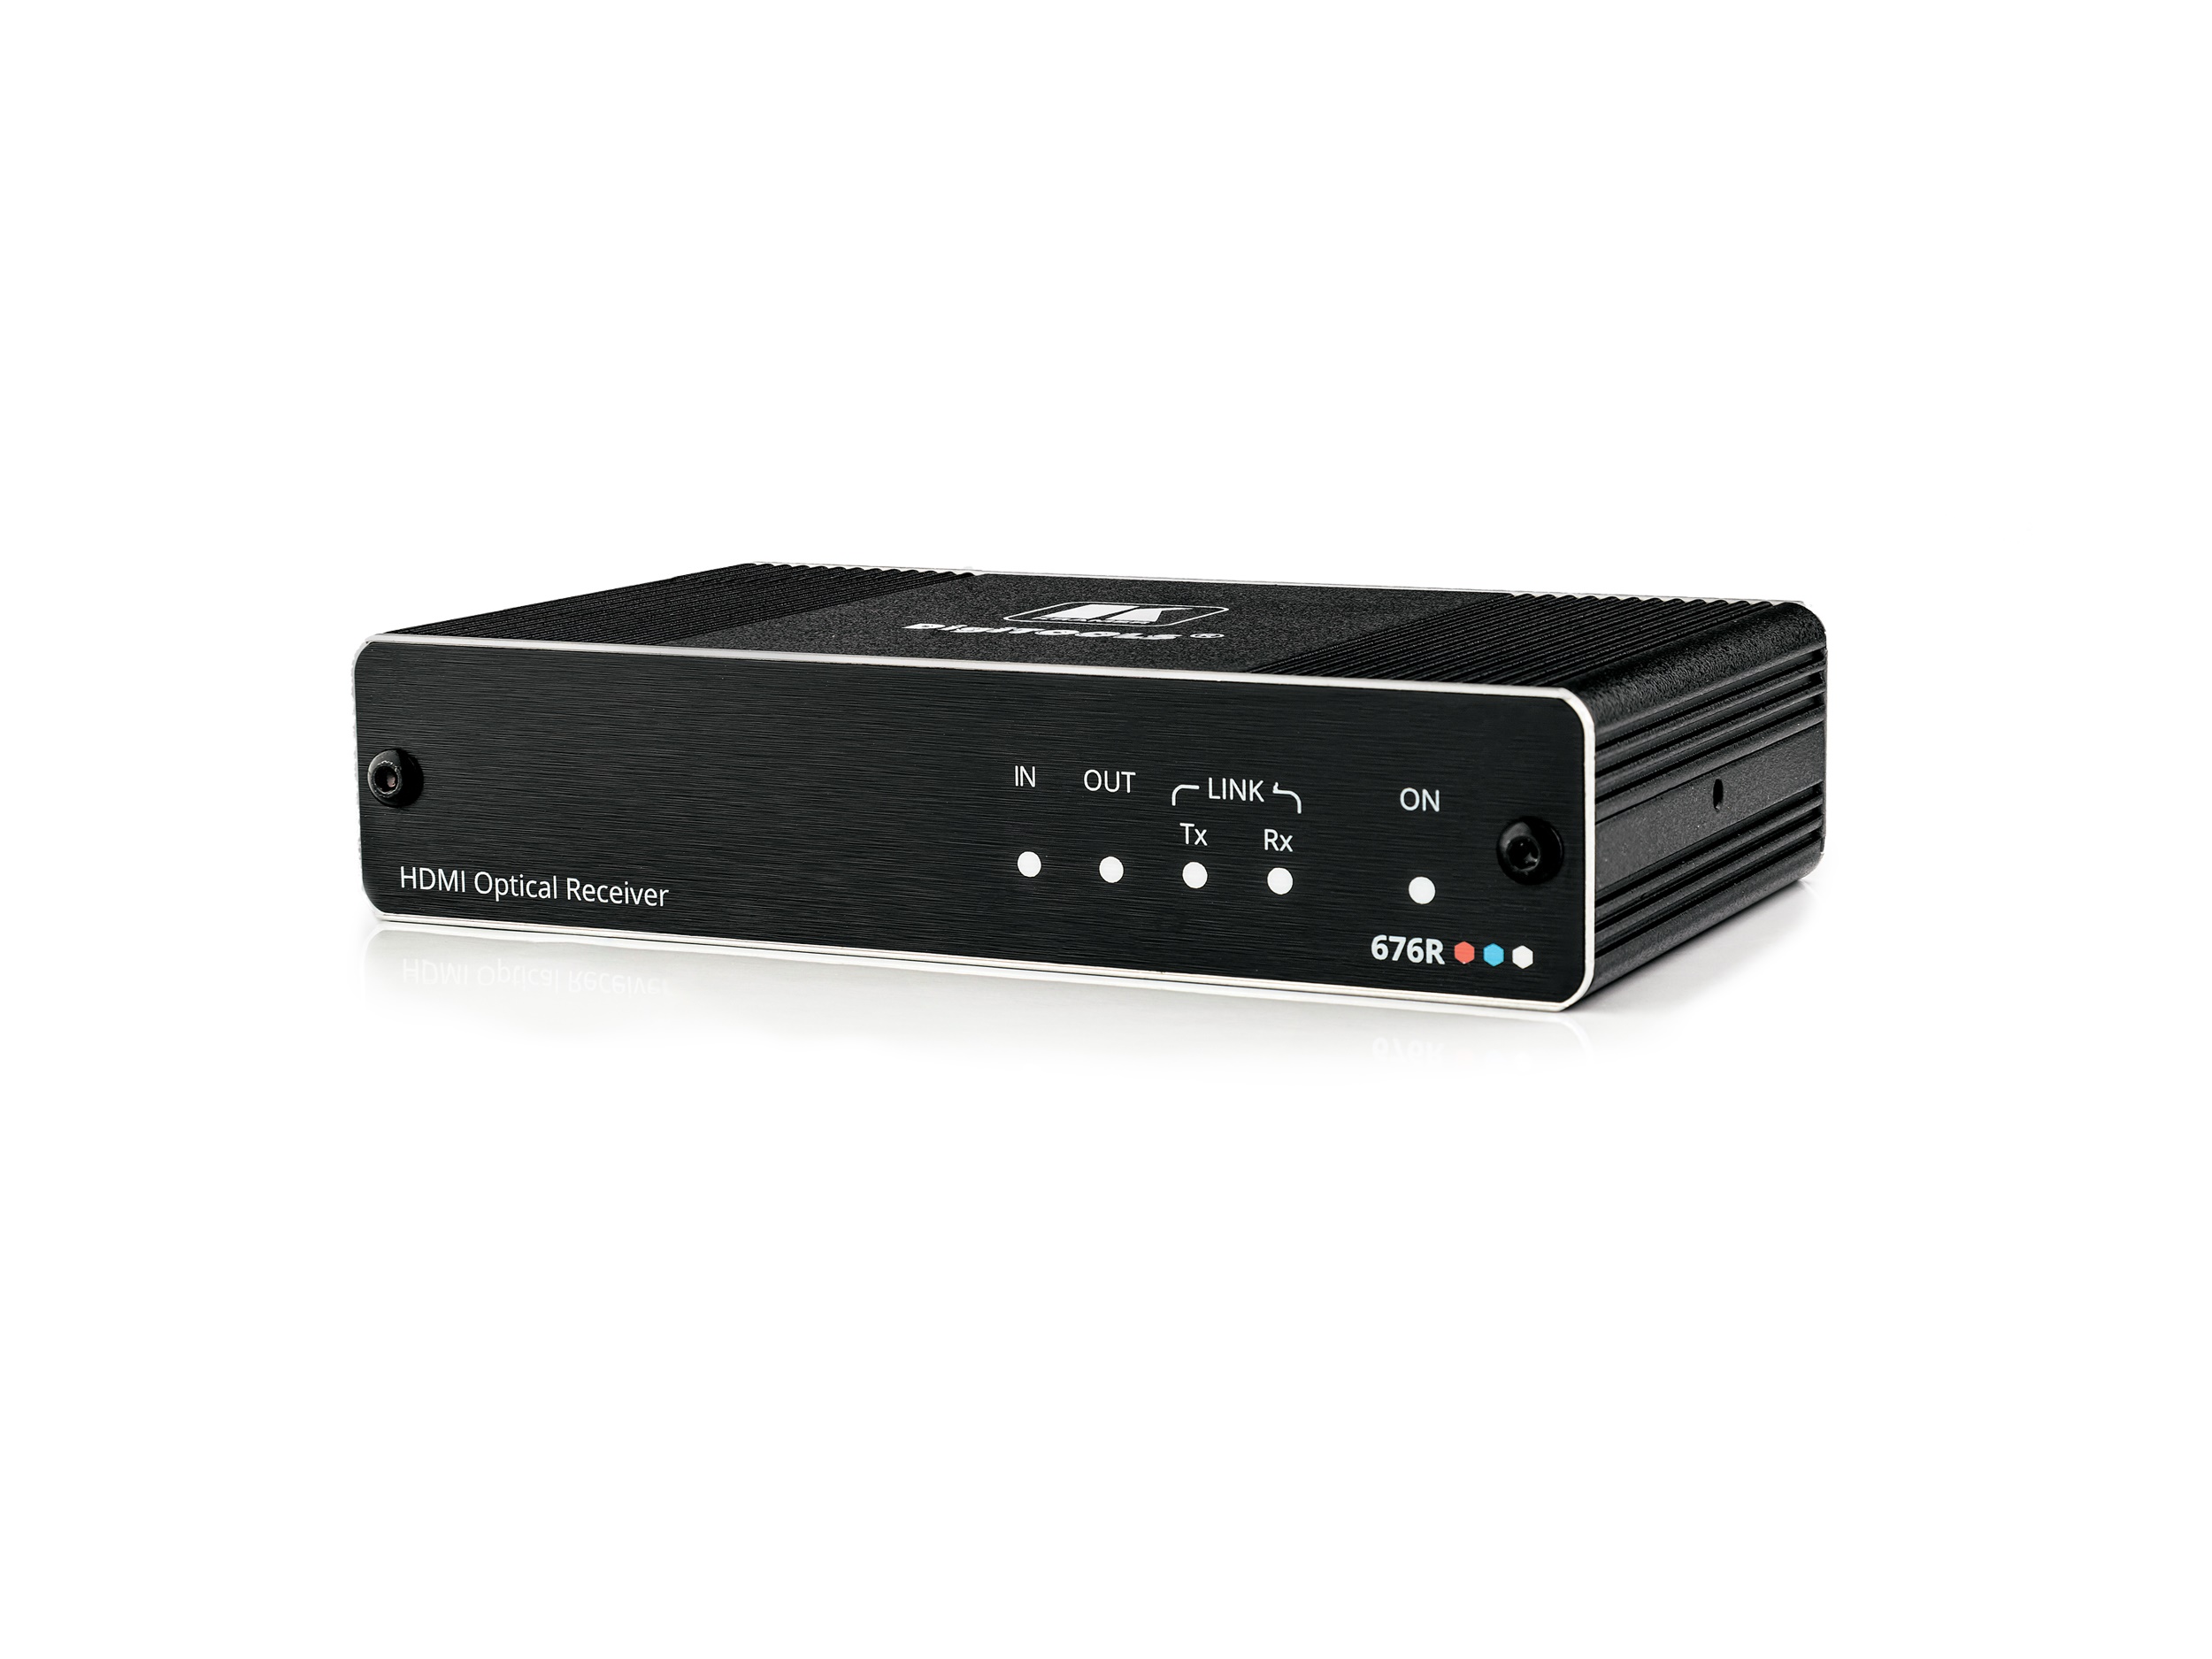 676R 4K60 4x4x4 HDMI and RS-232 Receiver over Ultra-Reach MM/SM Fiber Optic by Kramer